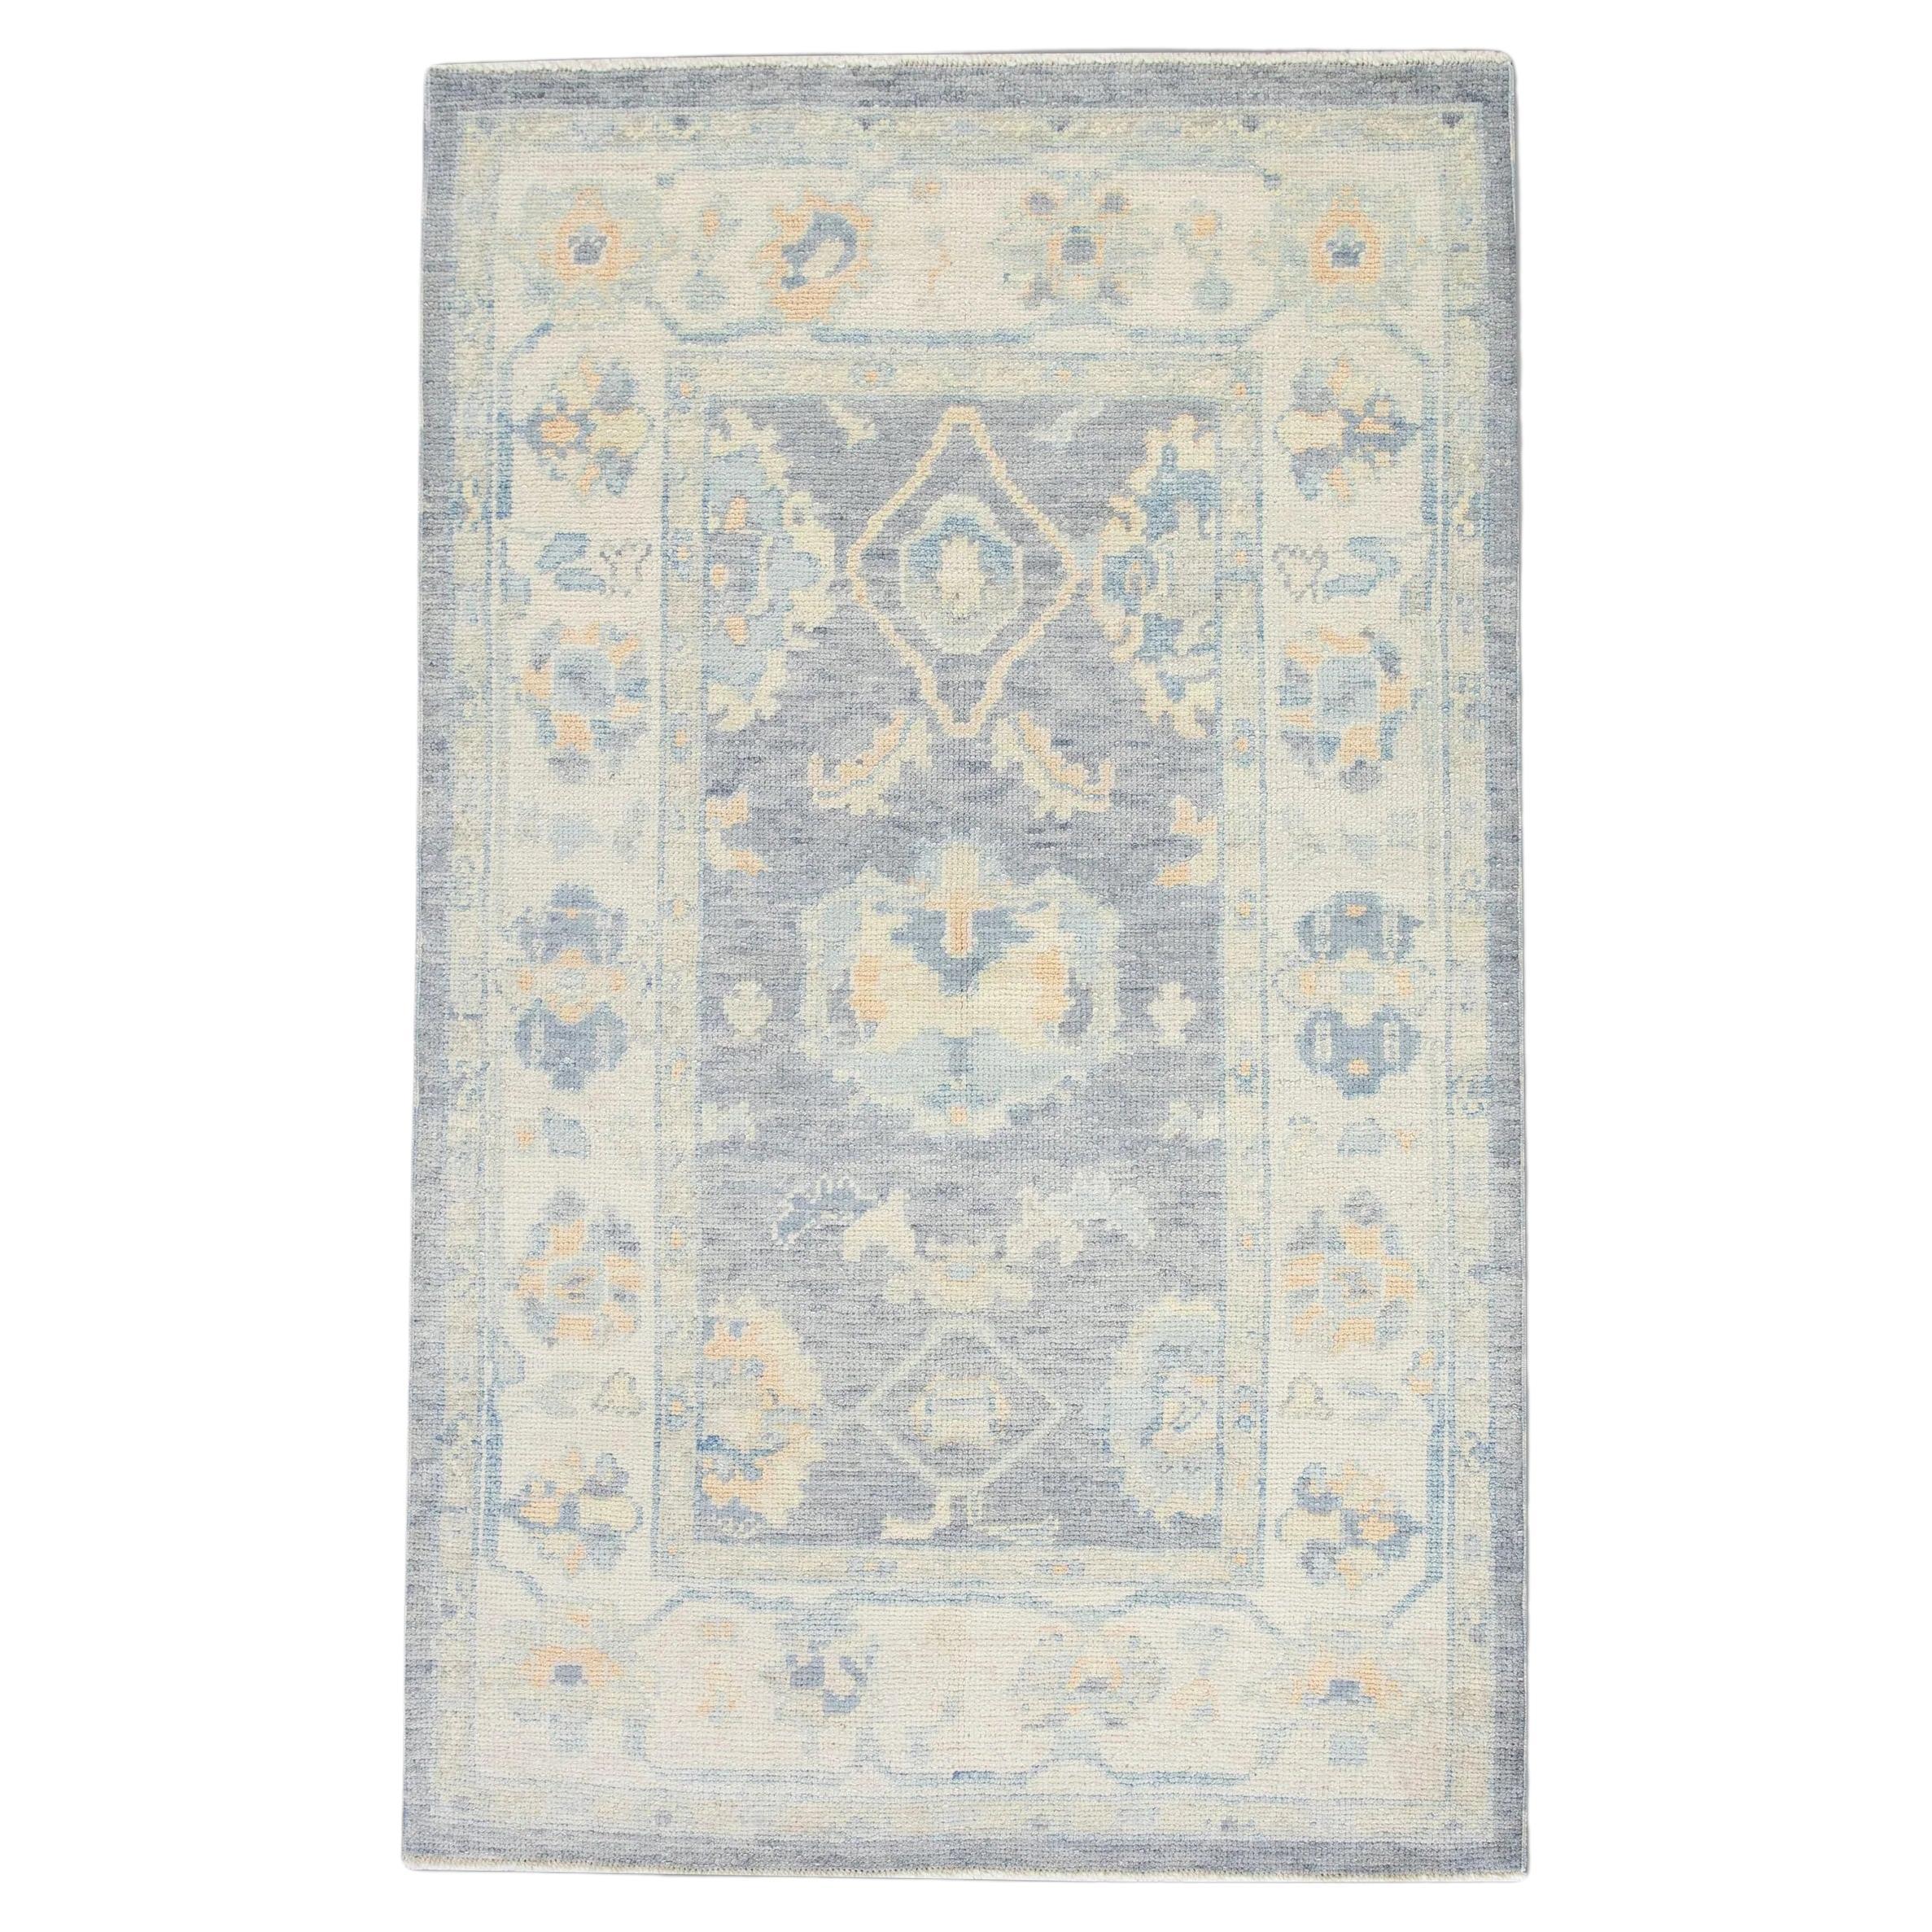 Periwinkle Blue Floral Design Handwoven Wool Turkish Oushak Rug 3'10" x 6' For Sale